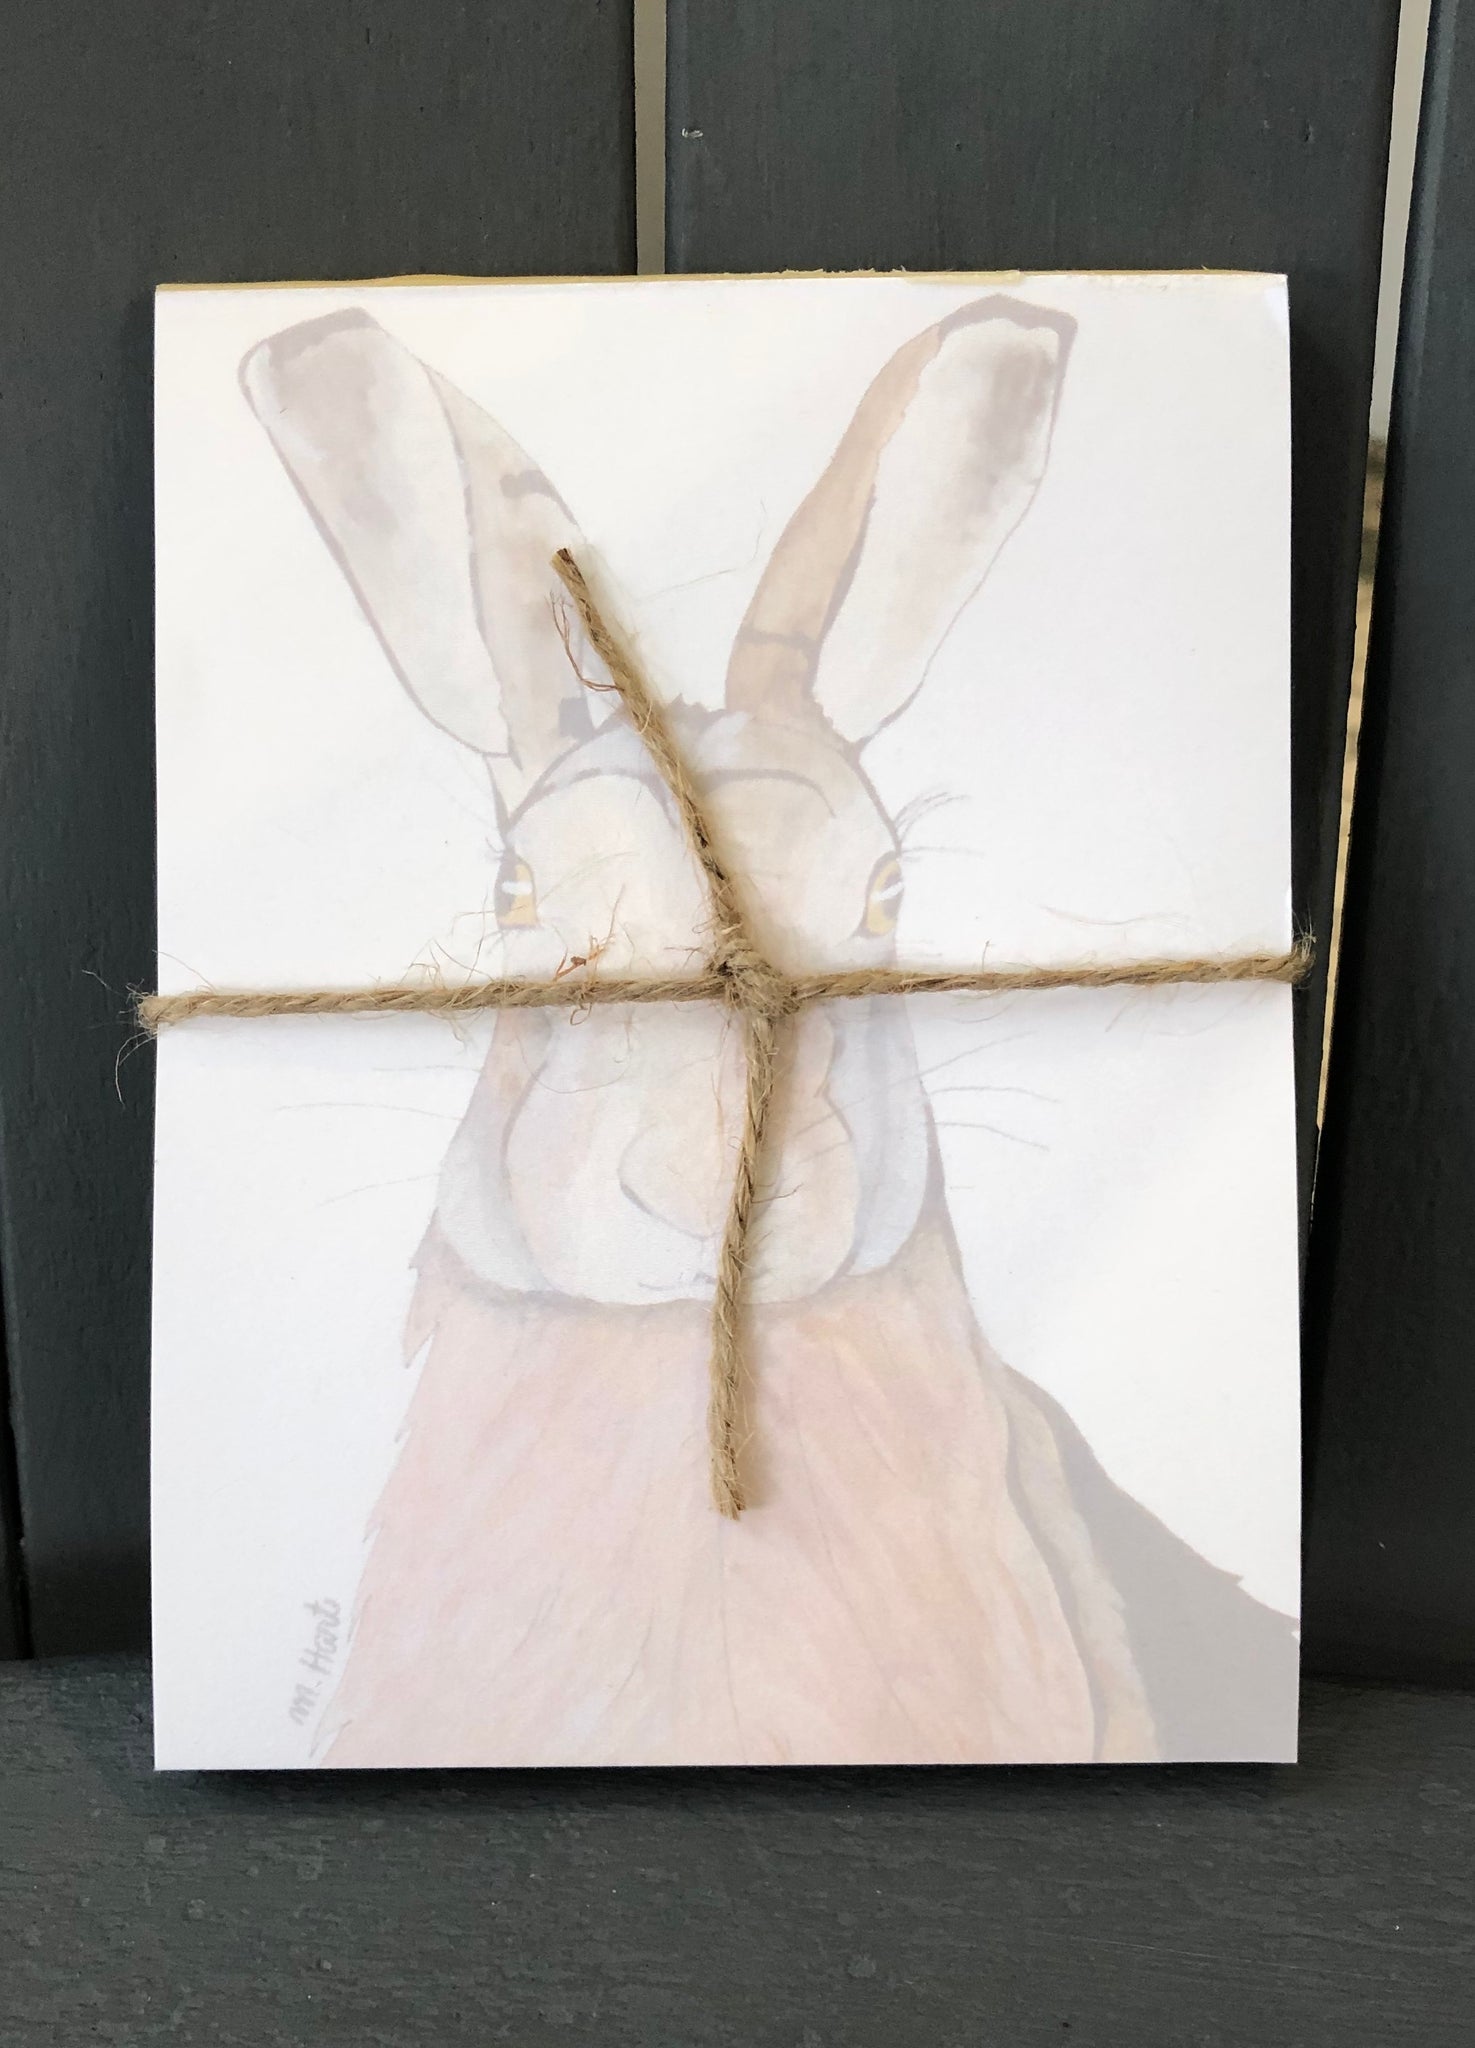 There is a notepad tied together with twice. The paper of the notepad is printed with a design of a hare or a rabbit.